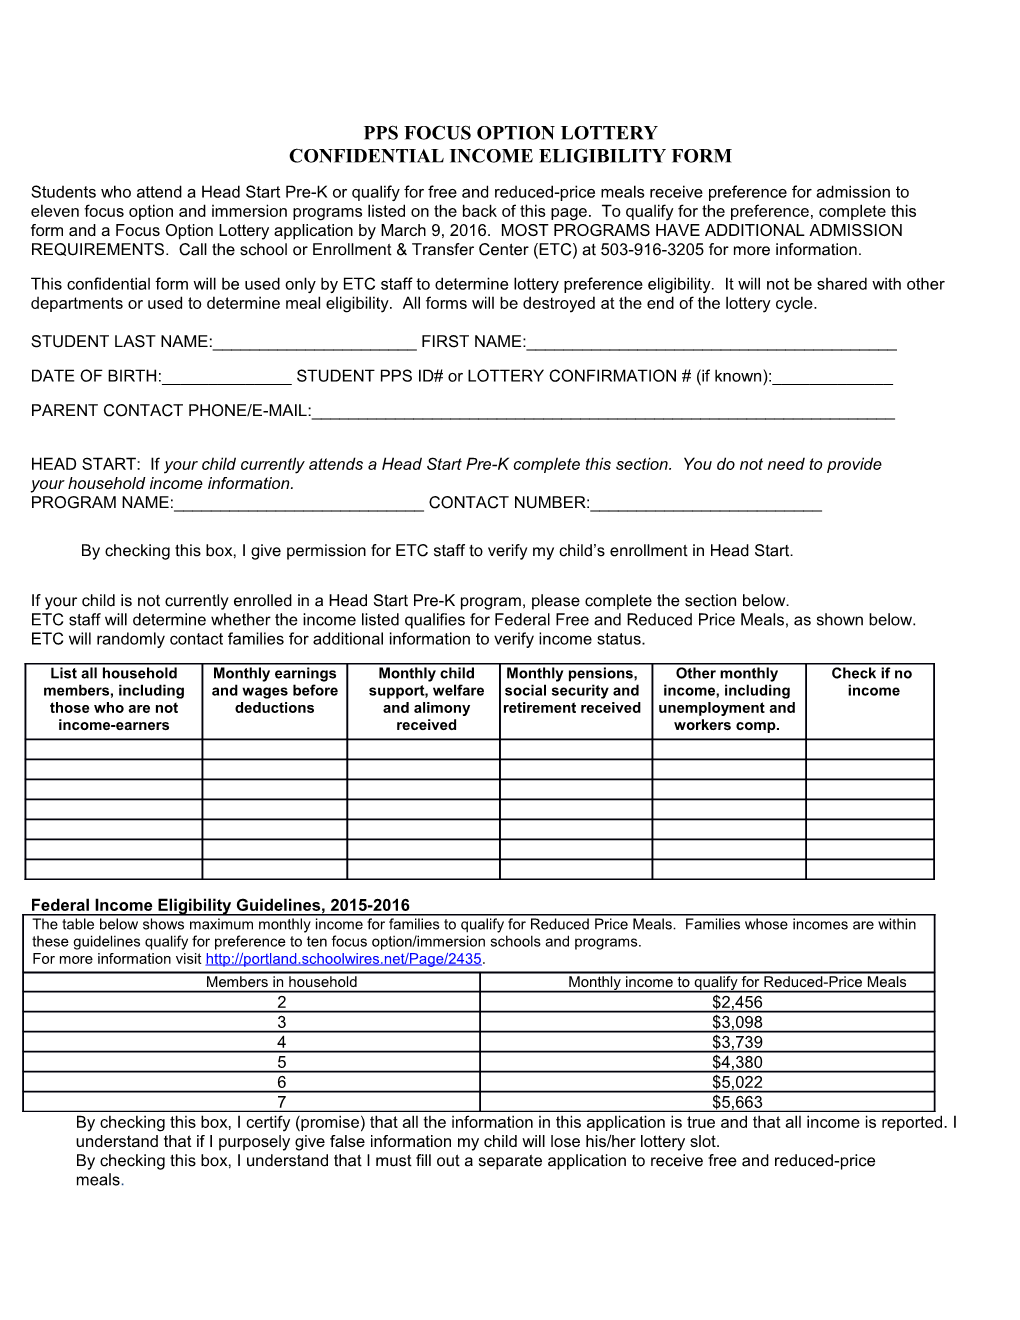 Pps Focus Option Lottery Confidential Income Eligibility Form